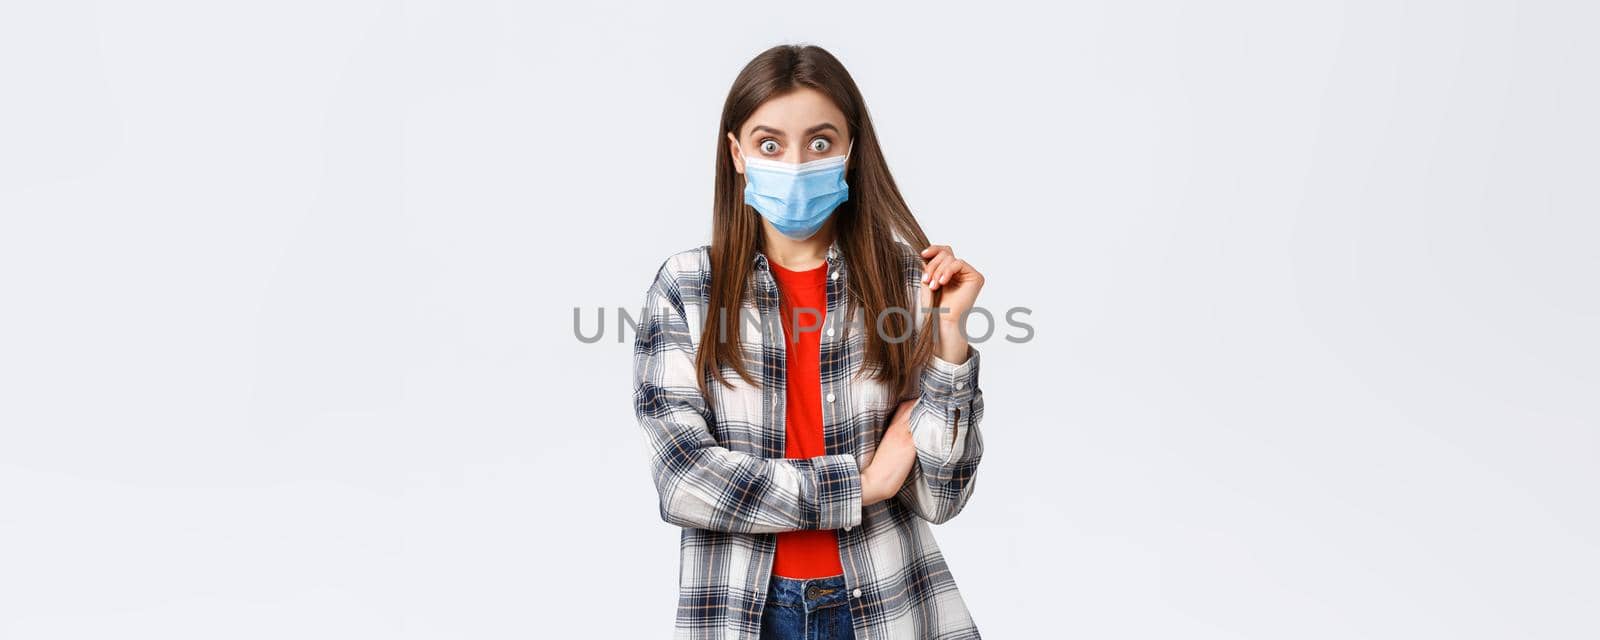 Coronavirus outbreak, leisure on quarantine, social distancing and emotions concept. Shocked and curious young girl in medical mask and checked shirt, stare at friend telling gossip or stunning news by Benzoix